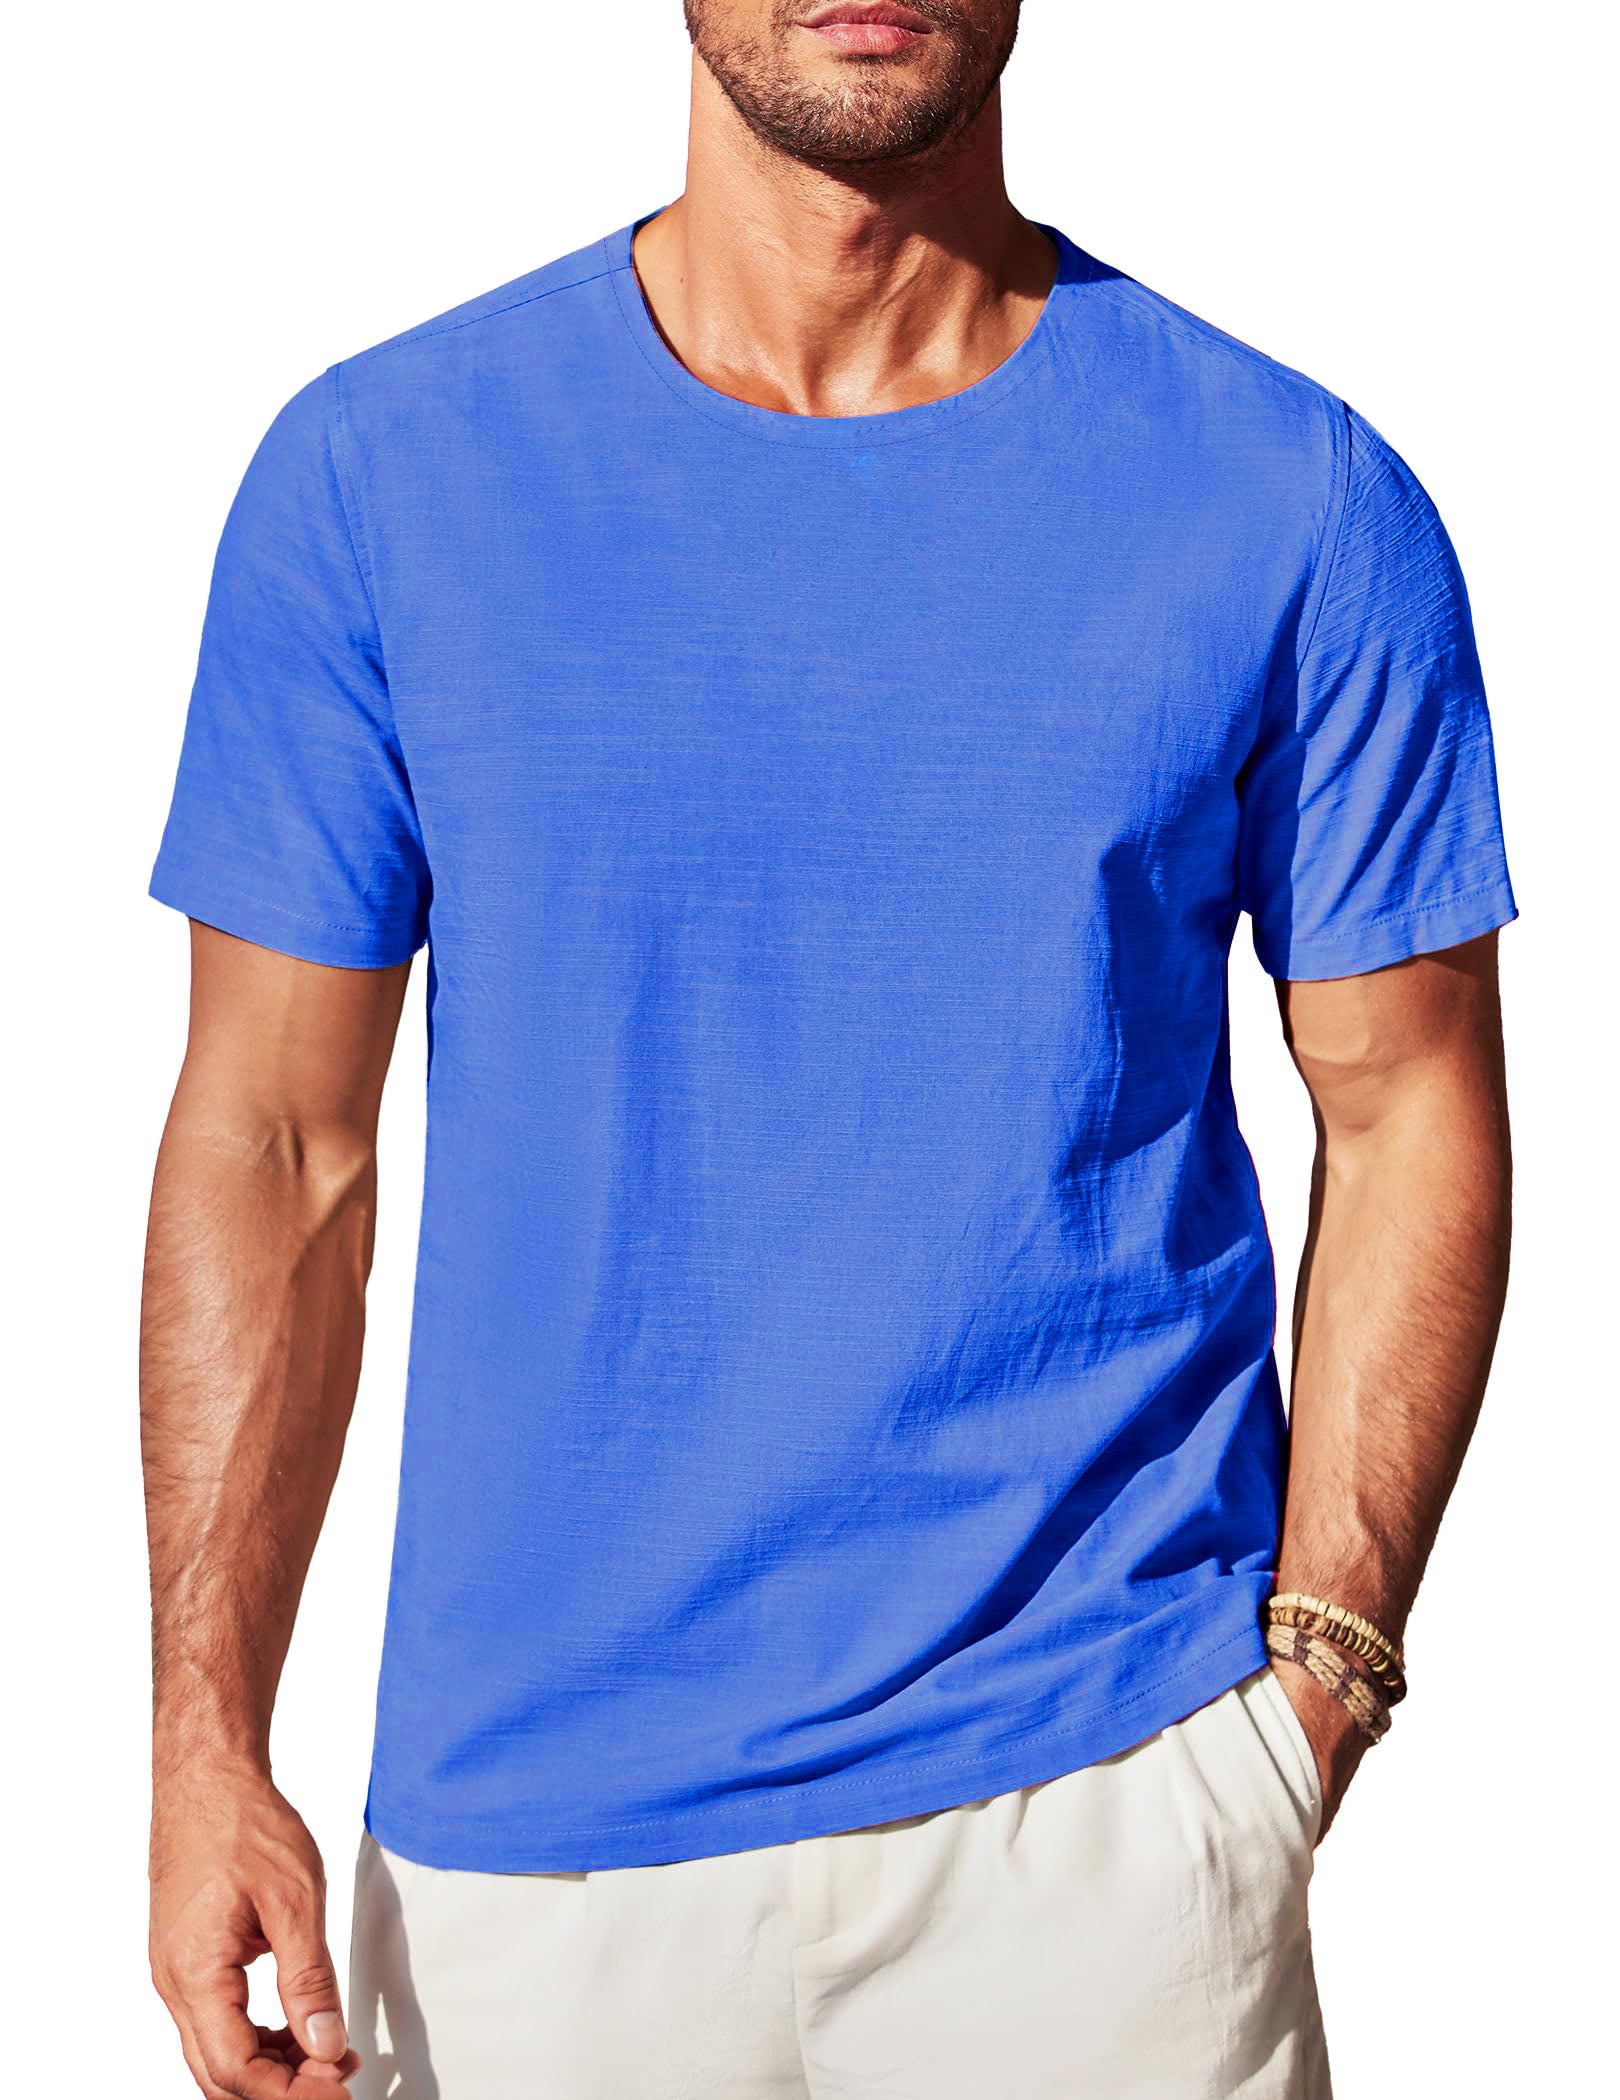 Men's Cotton and Linen Round Neck Short-Sleeved T-shirt